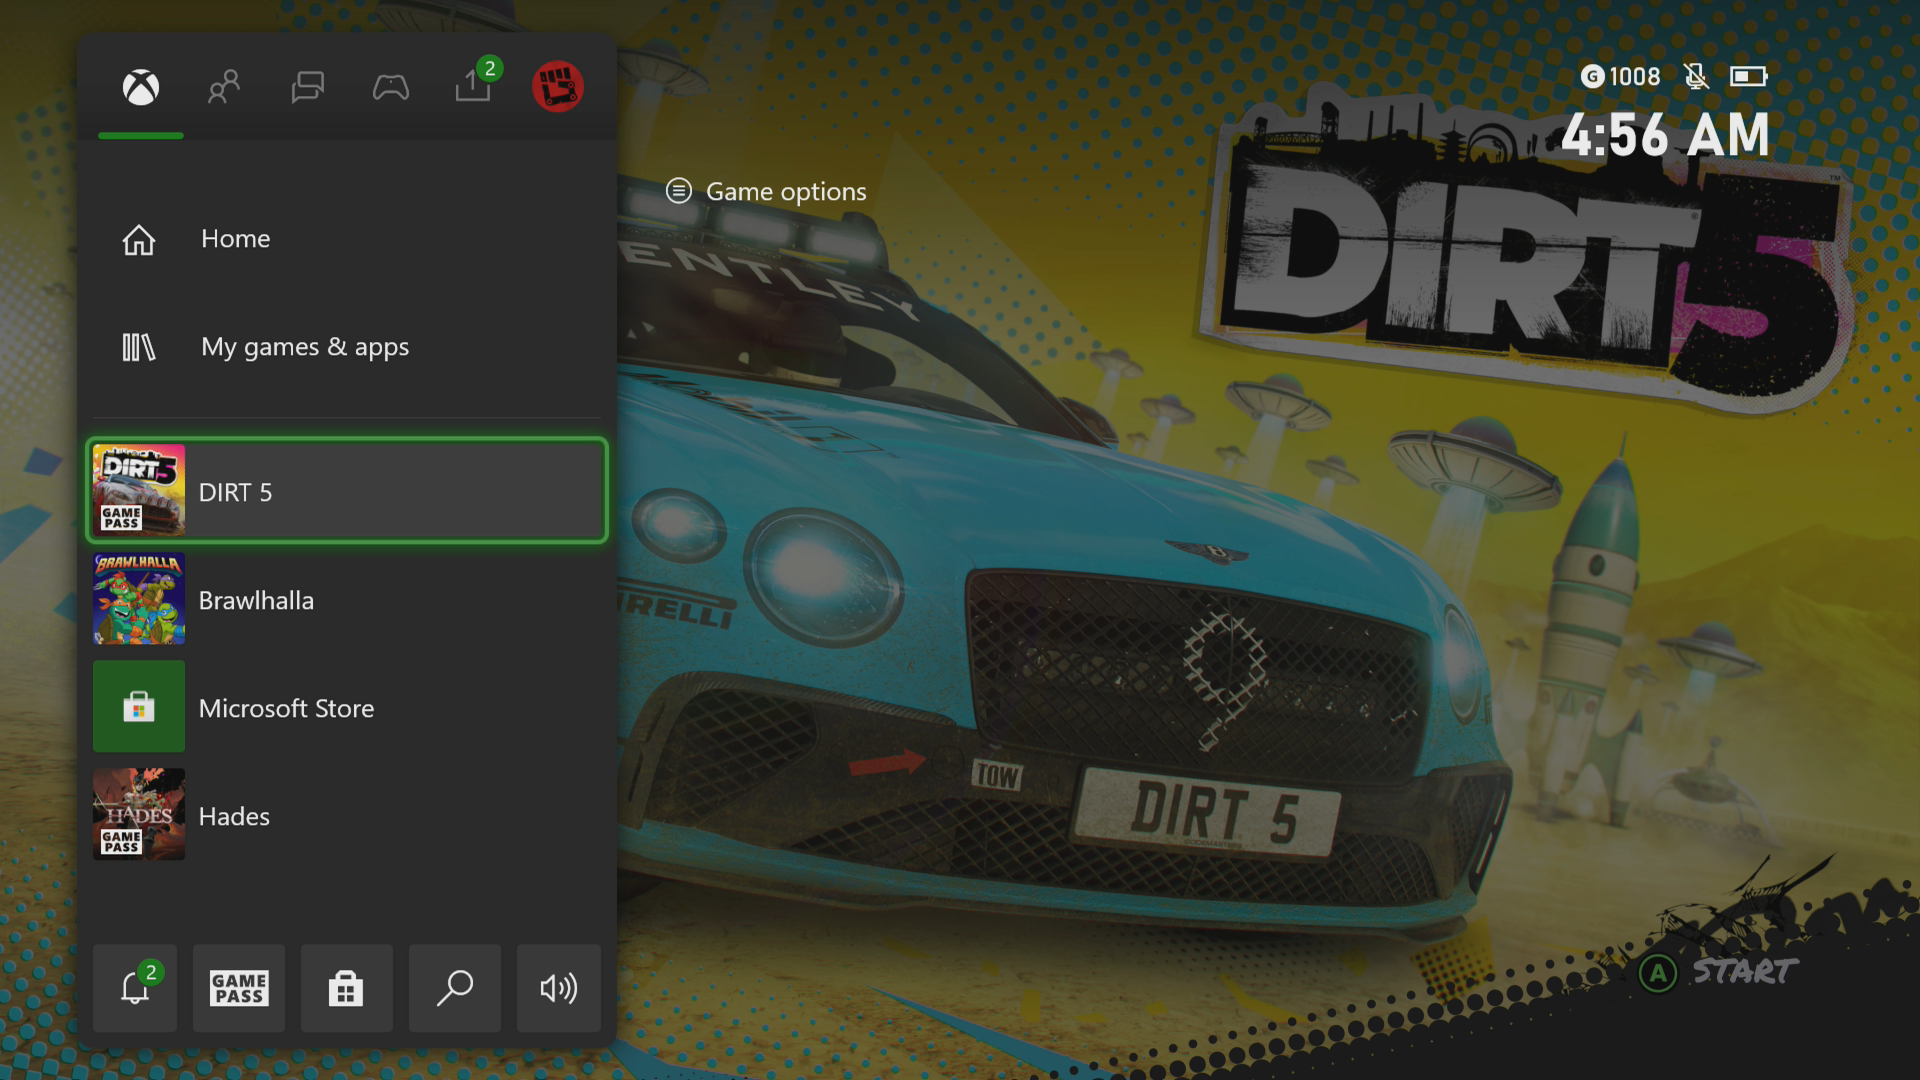 What to do when your Dirt 5 game keeps on crashing on your Xbox Series X